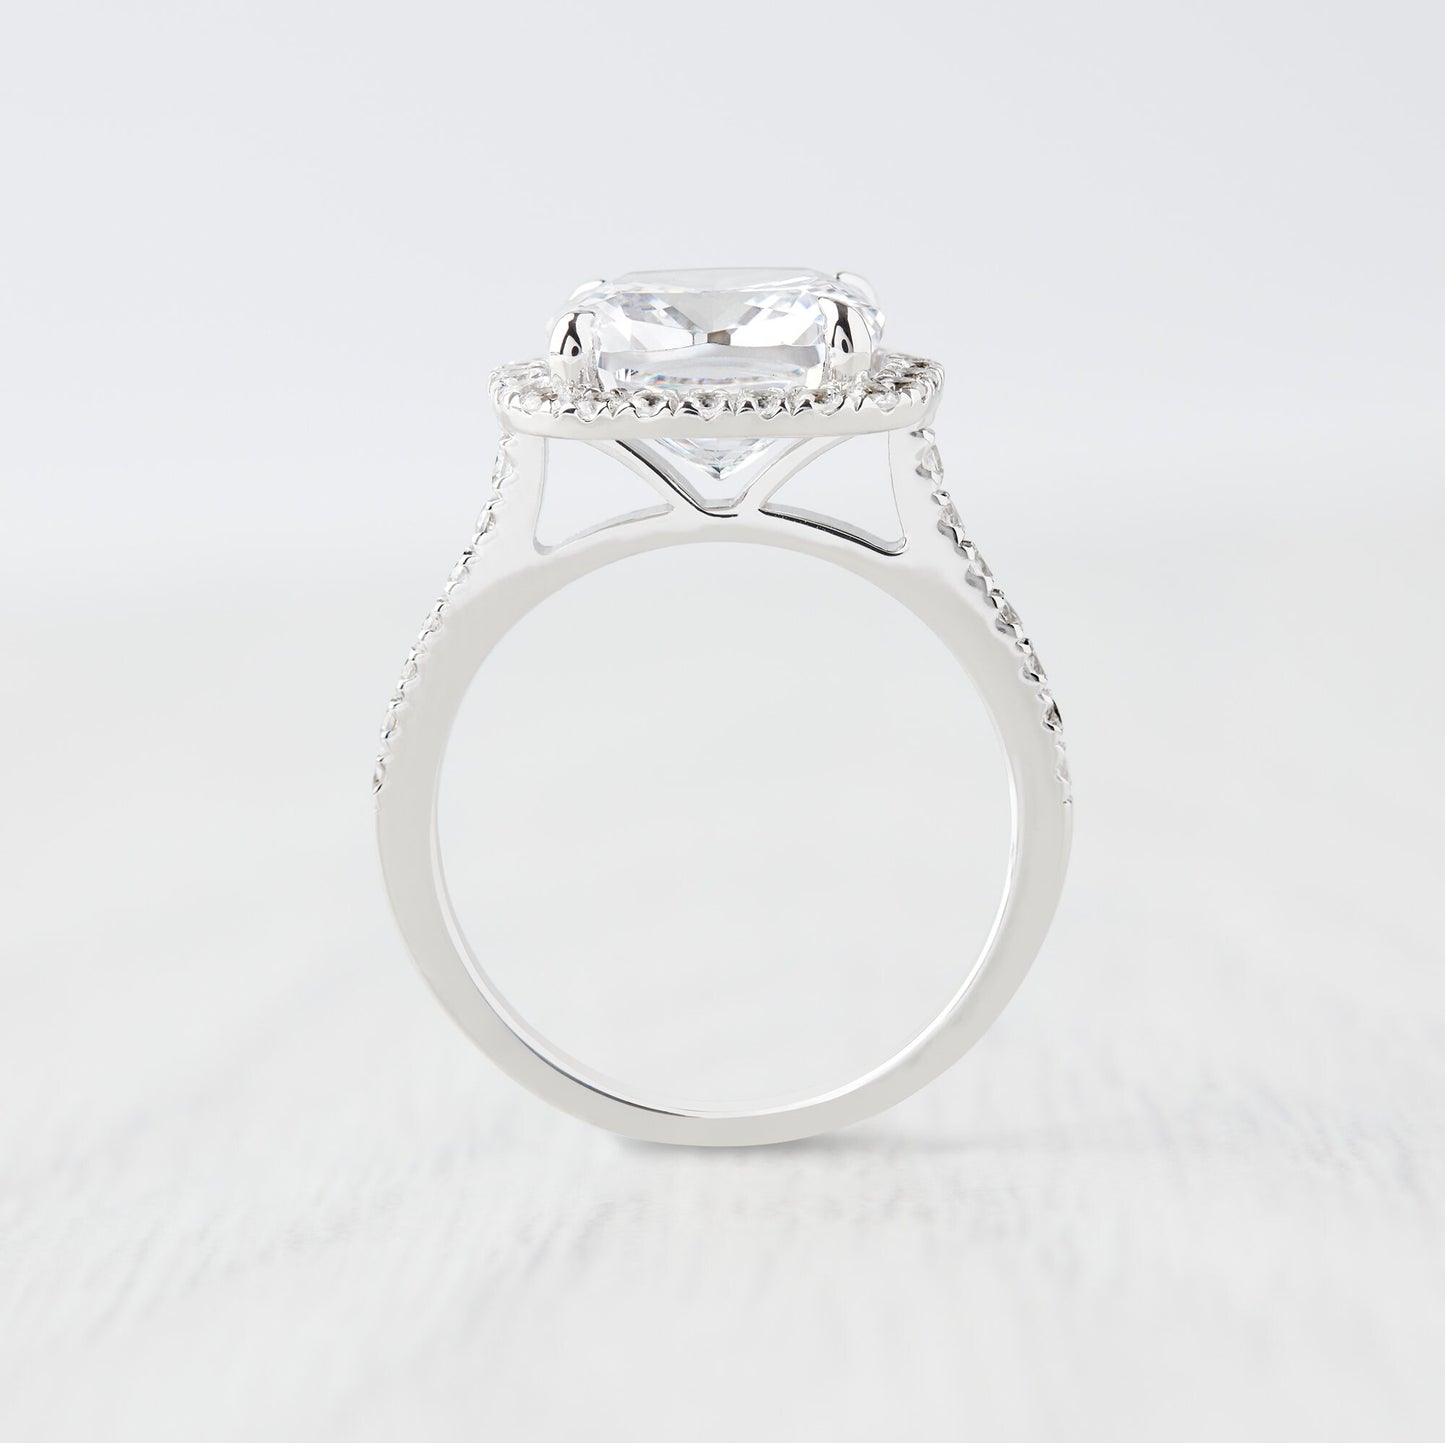 5.7ct Cushion cut Genuine Moissanite halo Engagement Ring - Available in gold, rose gold and white gold - Handmade